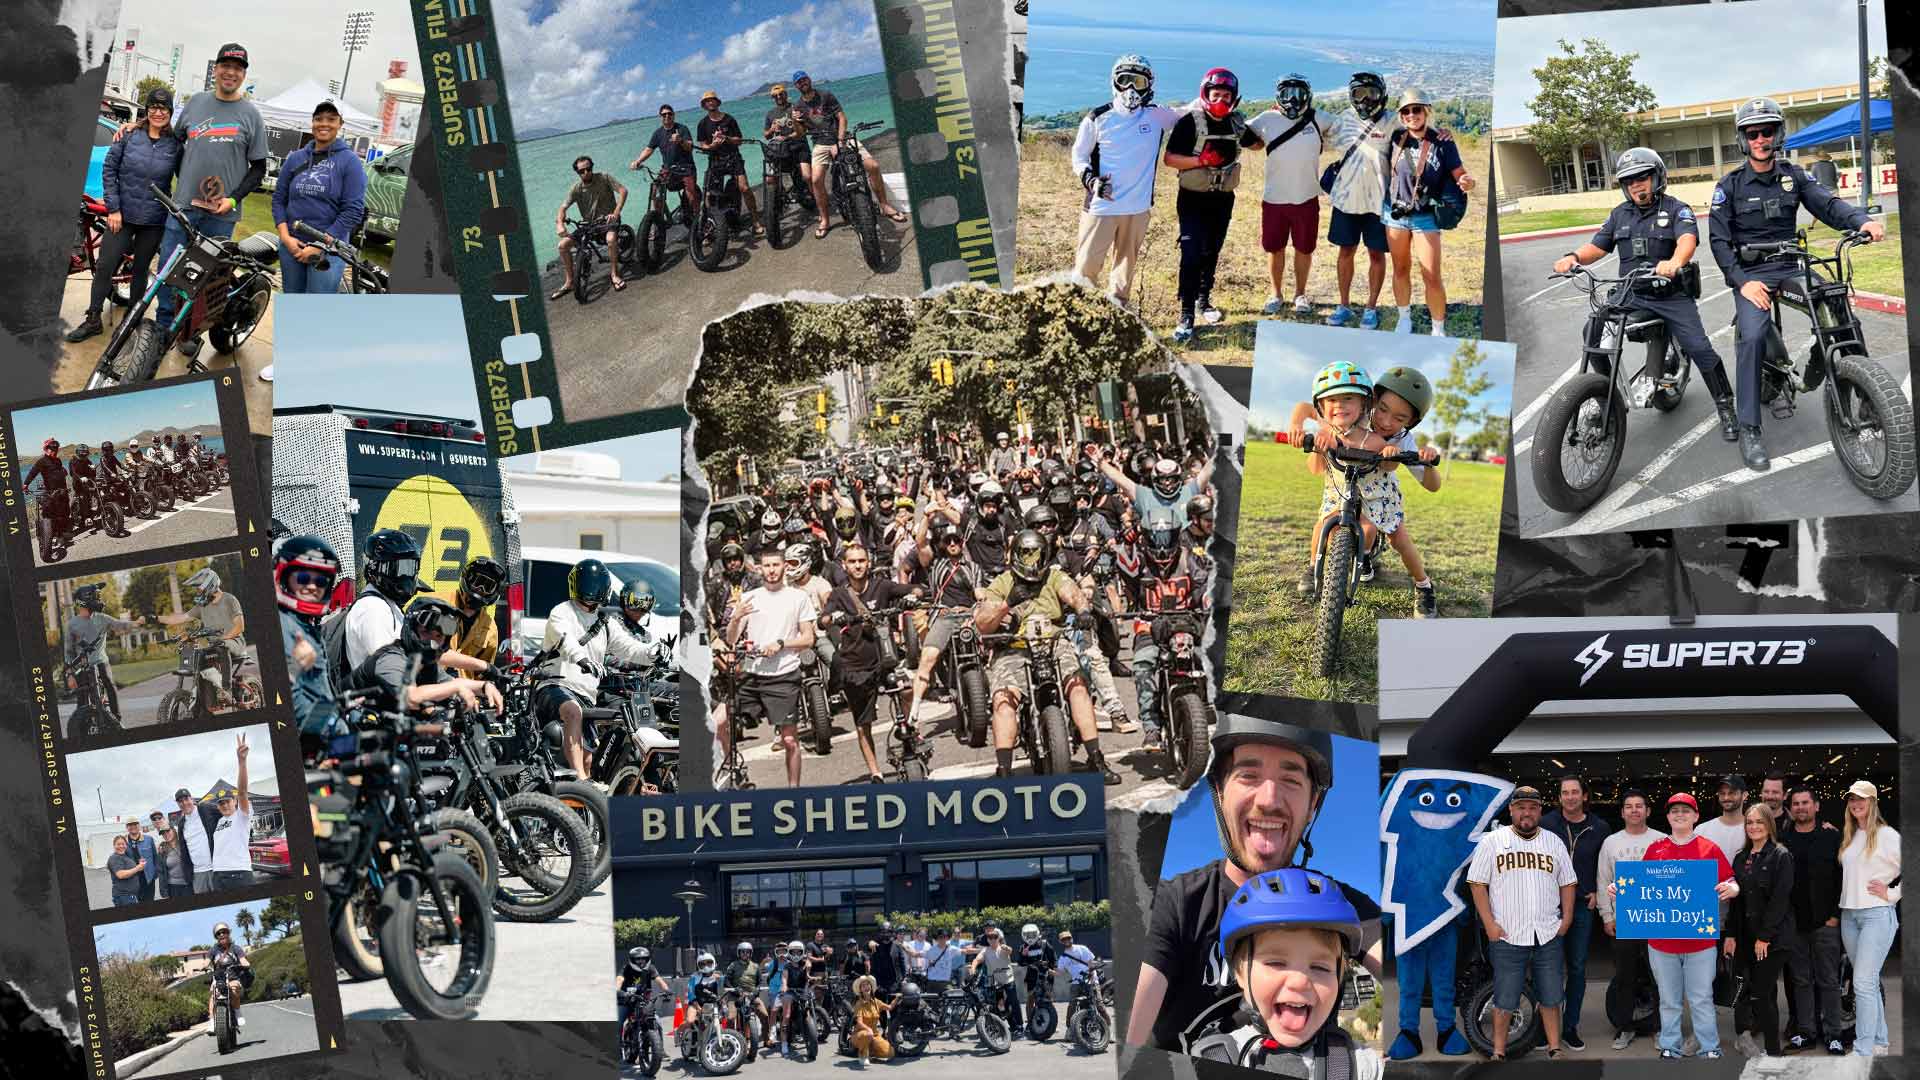 Collage of lifestyle images showing riders with their SUPER73 ebikes